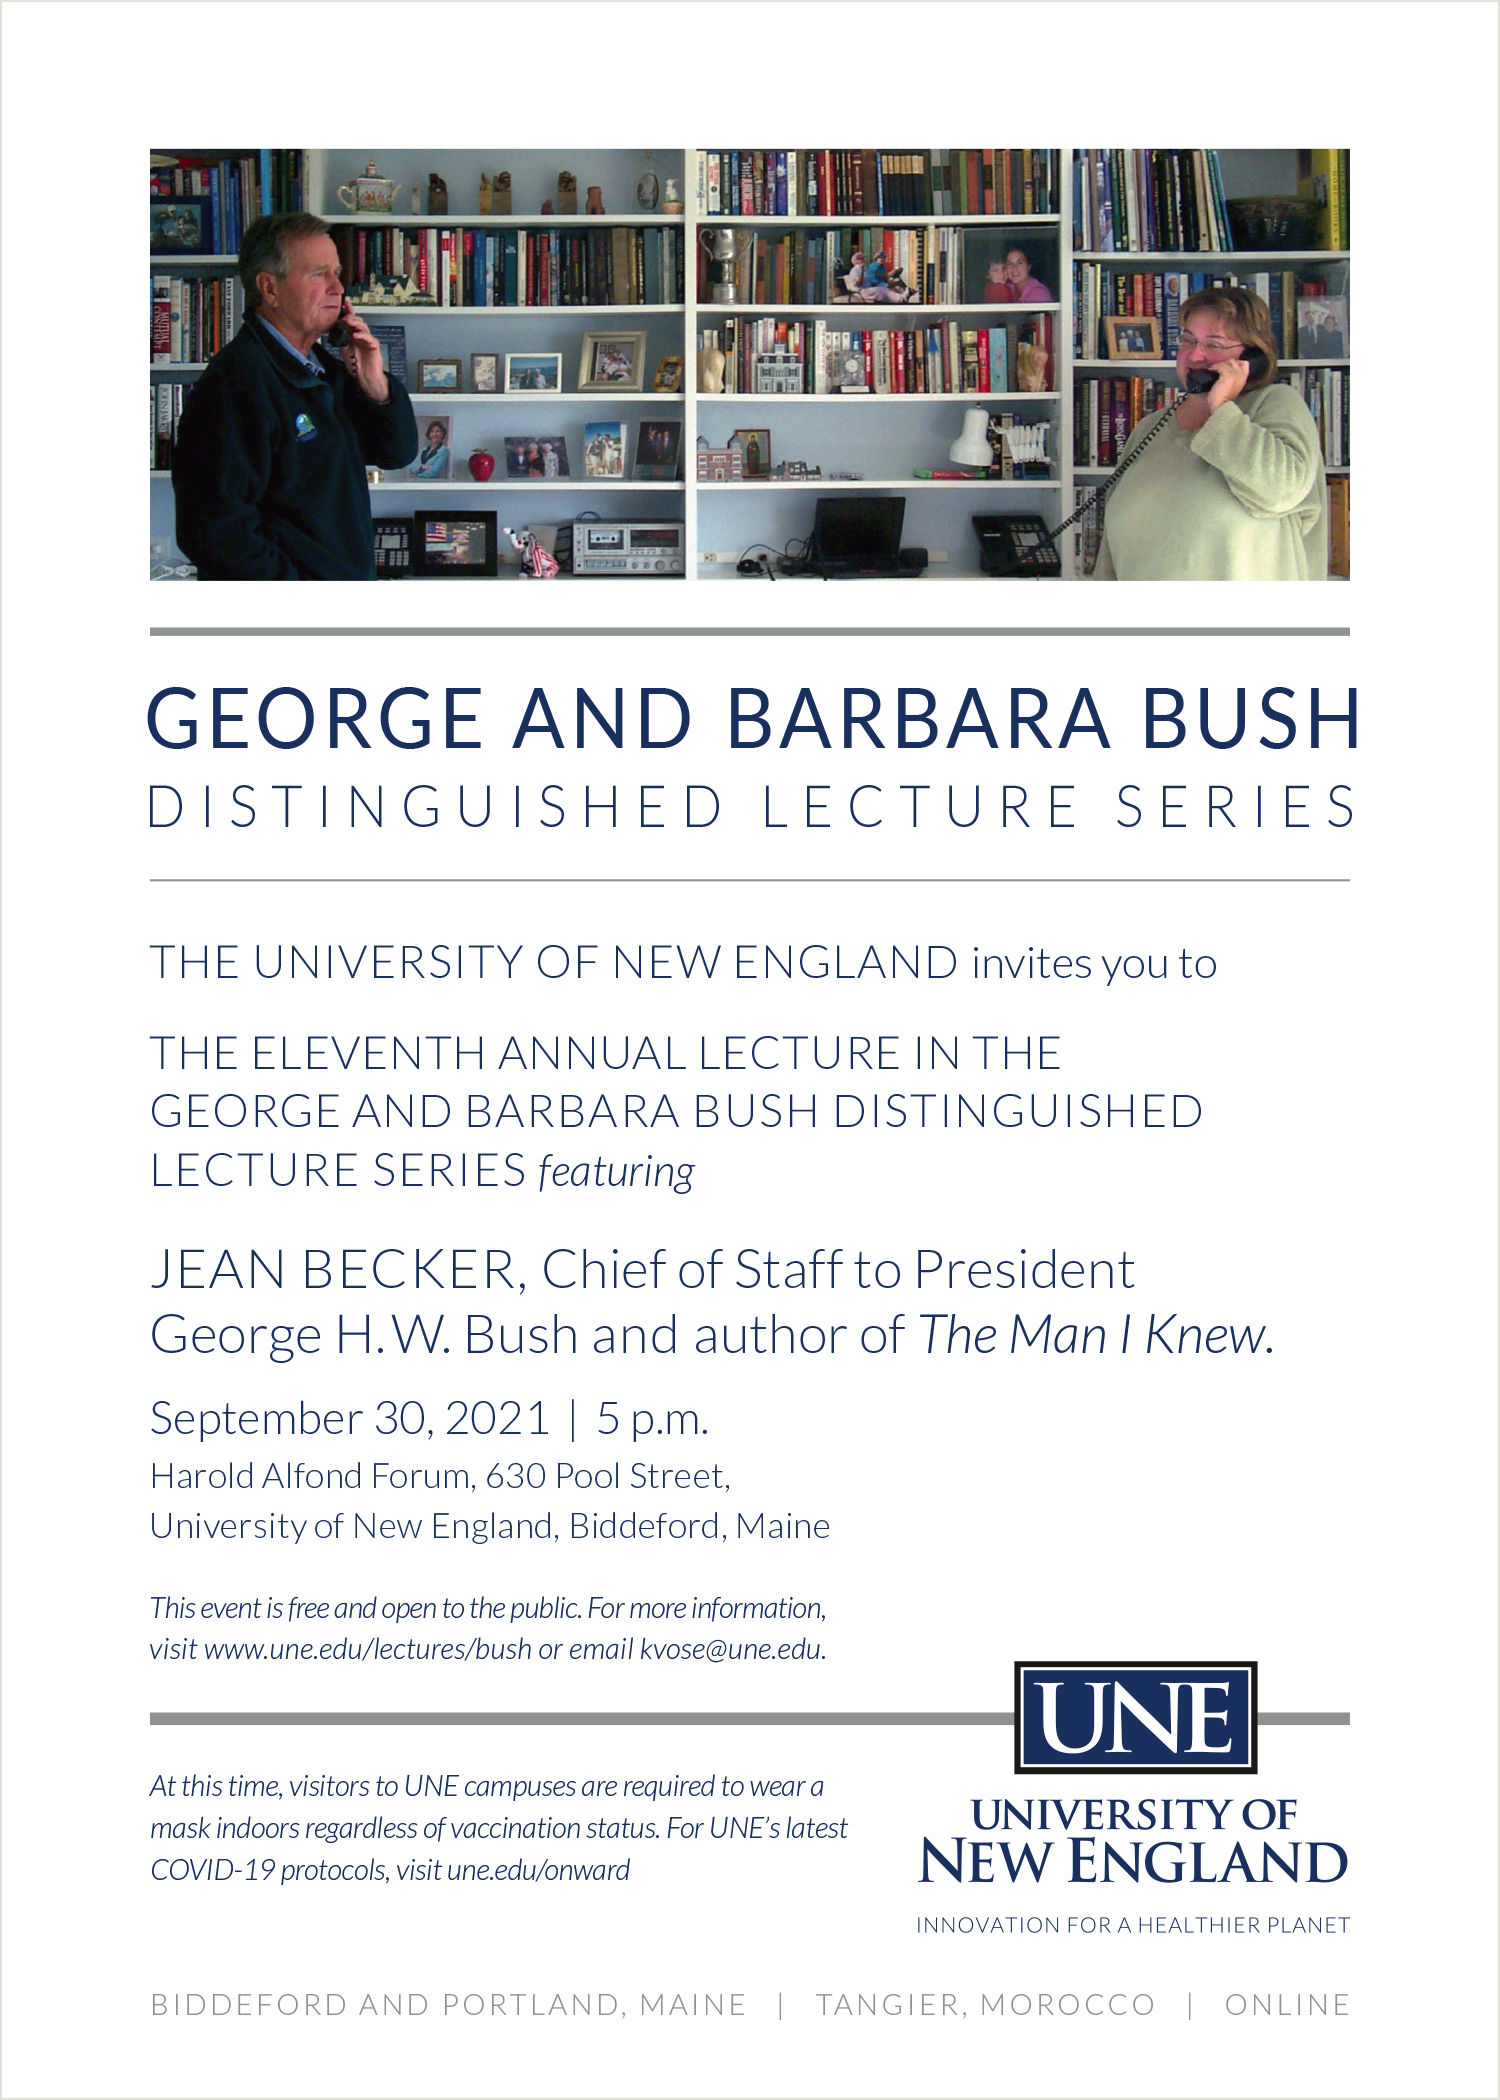 Poster for the 2021 bush lecture series event